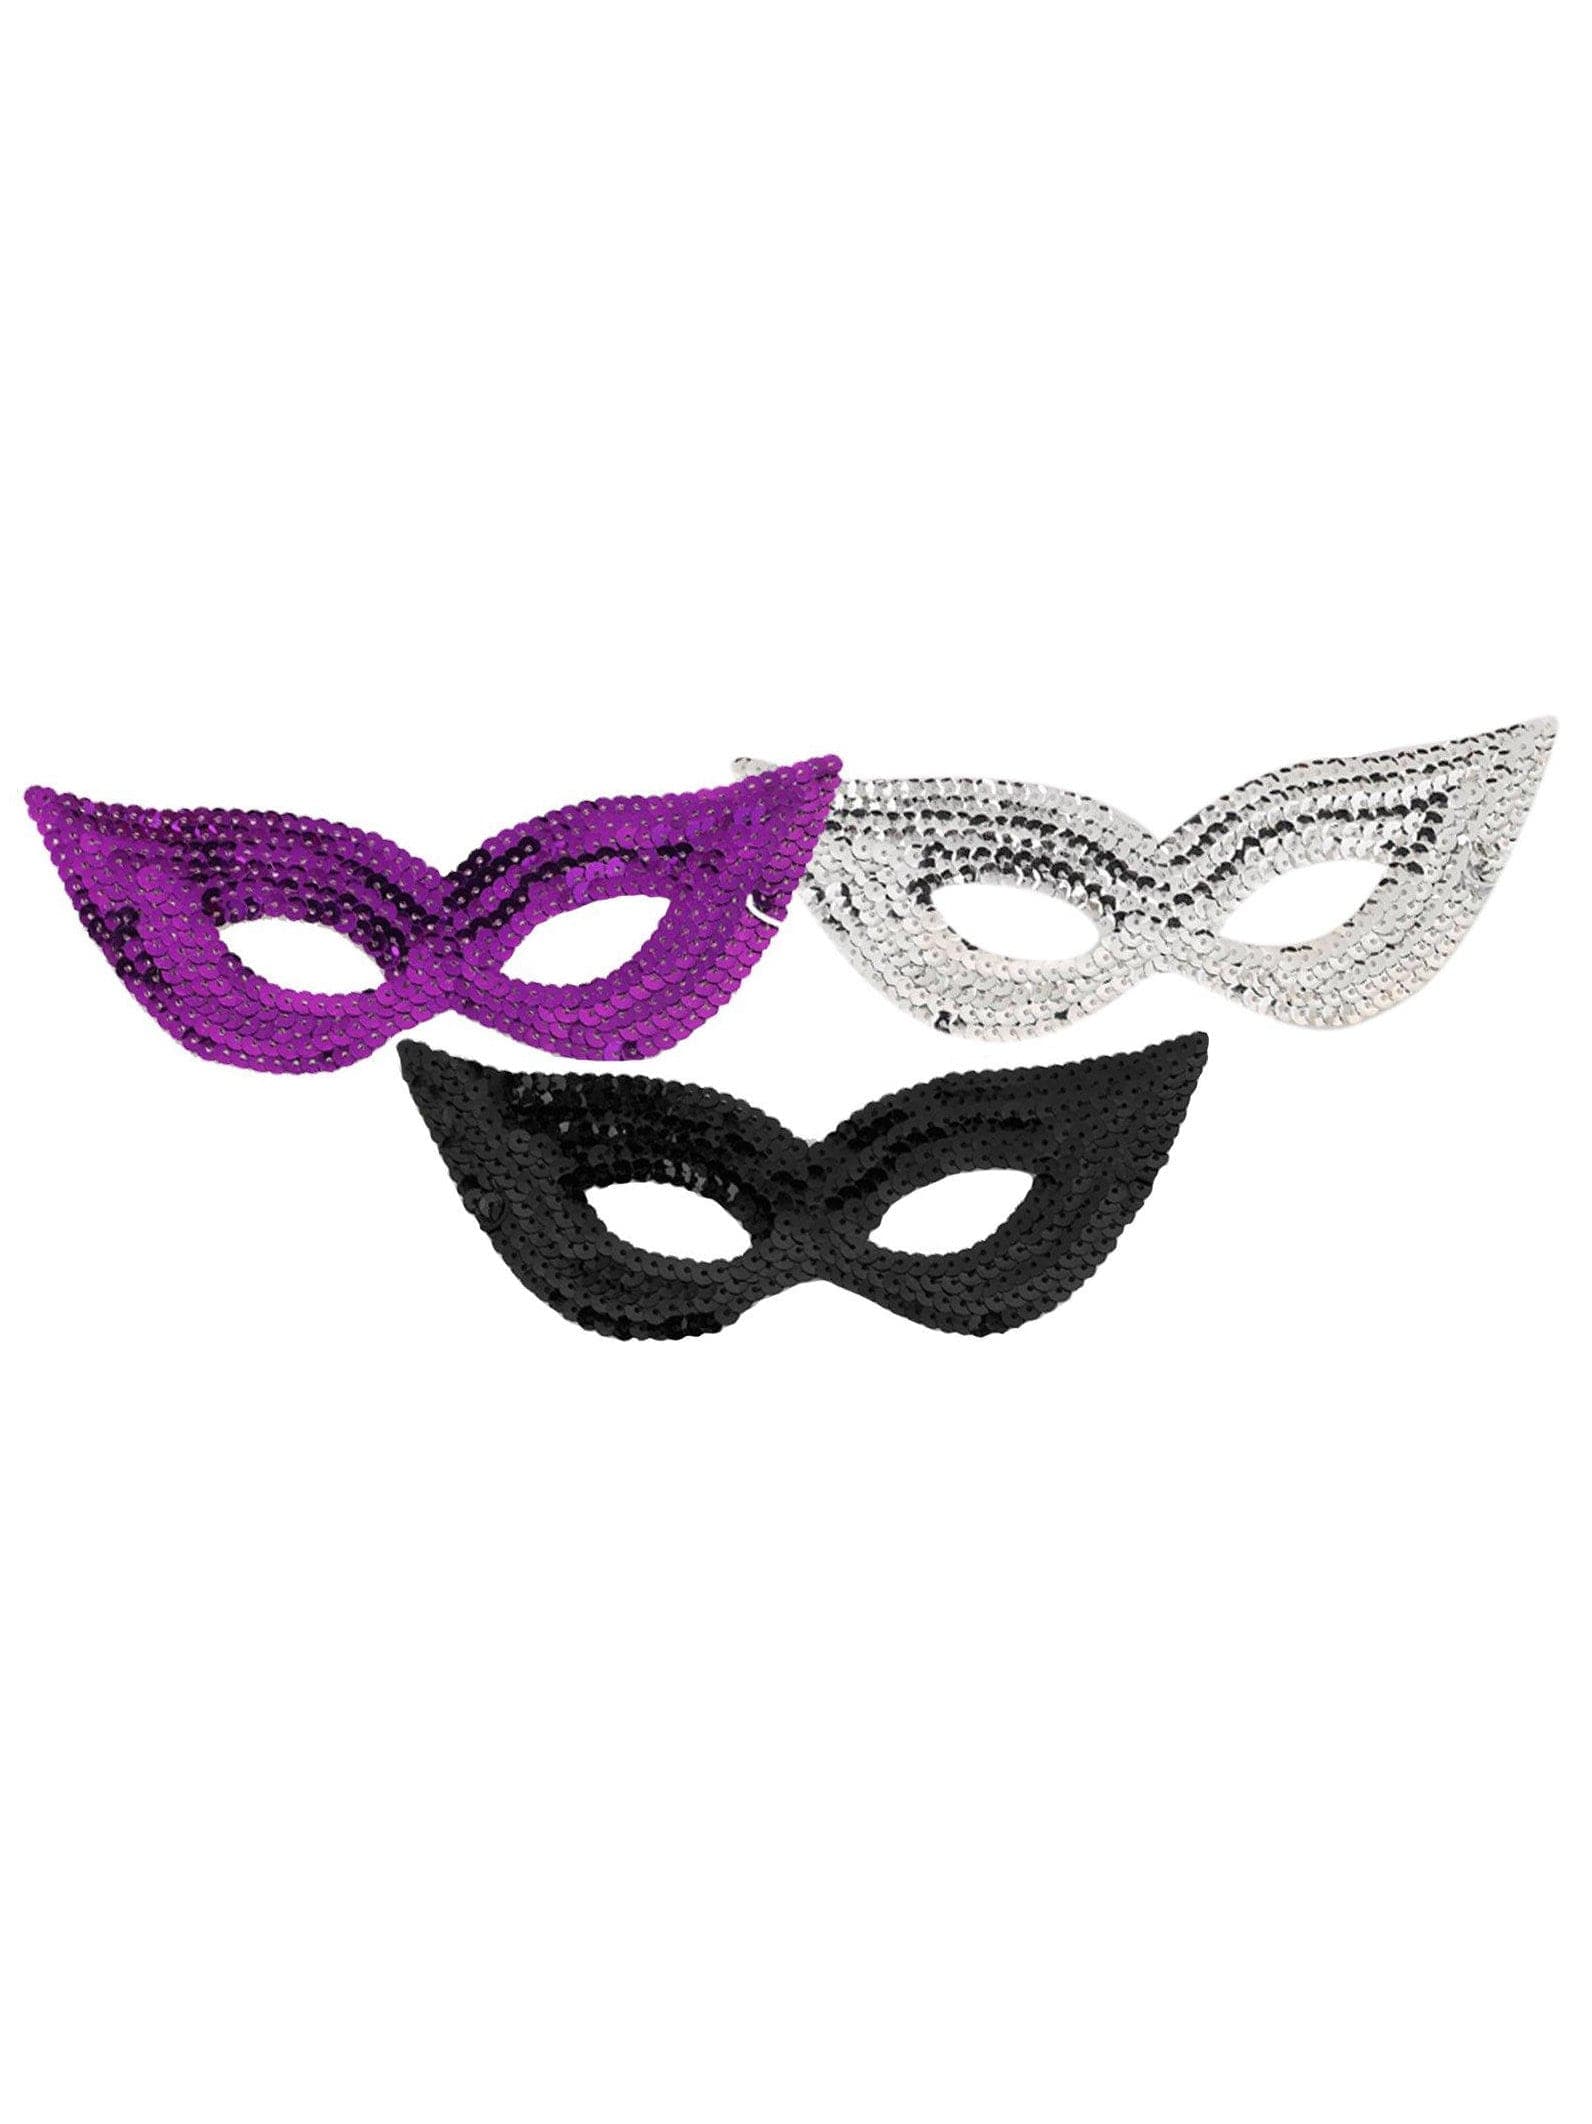 Silver Sequin Eye Mask - costumes.com